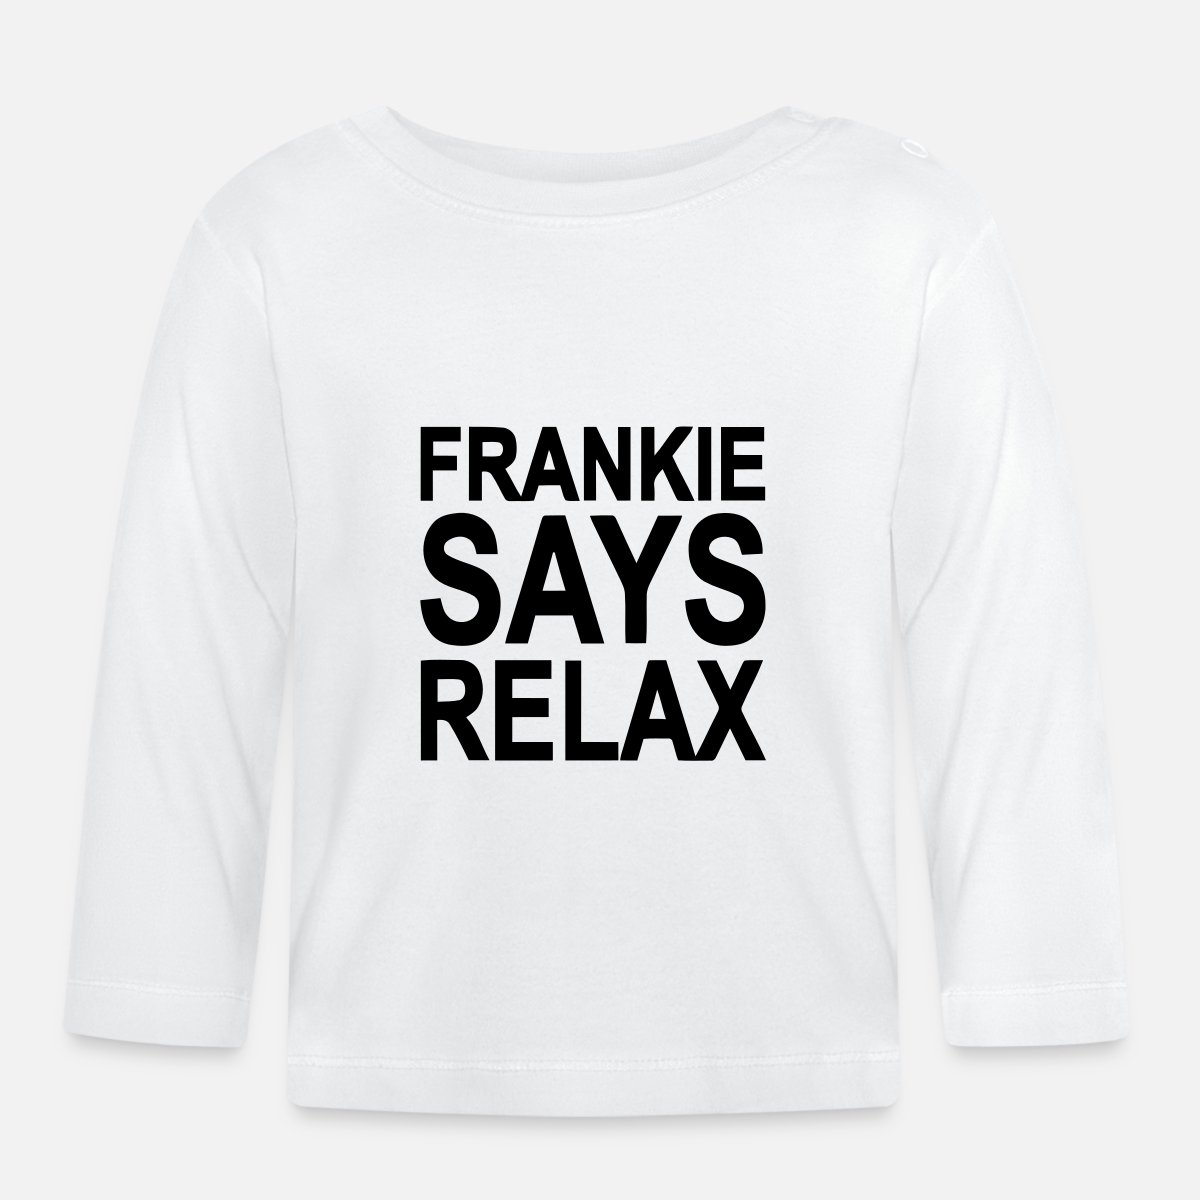 12-18 Months Long Sleeve babygrow Frankie Says Relax